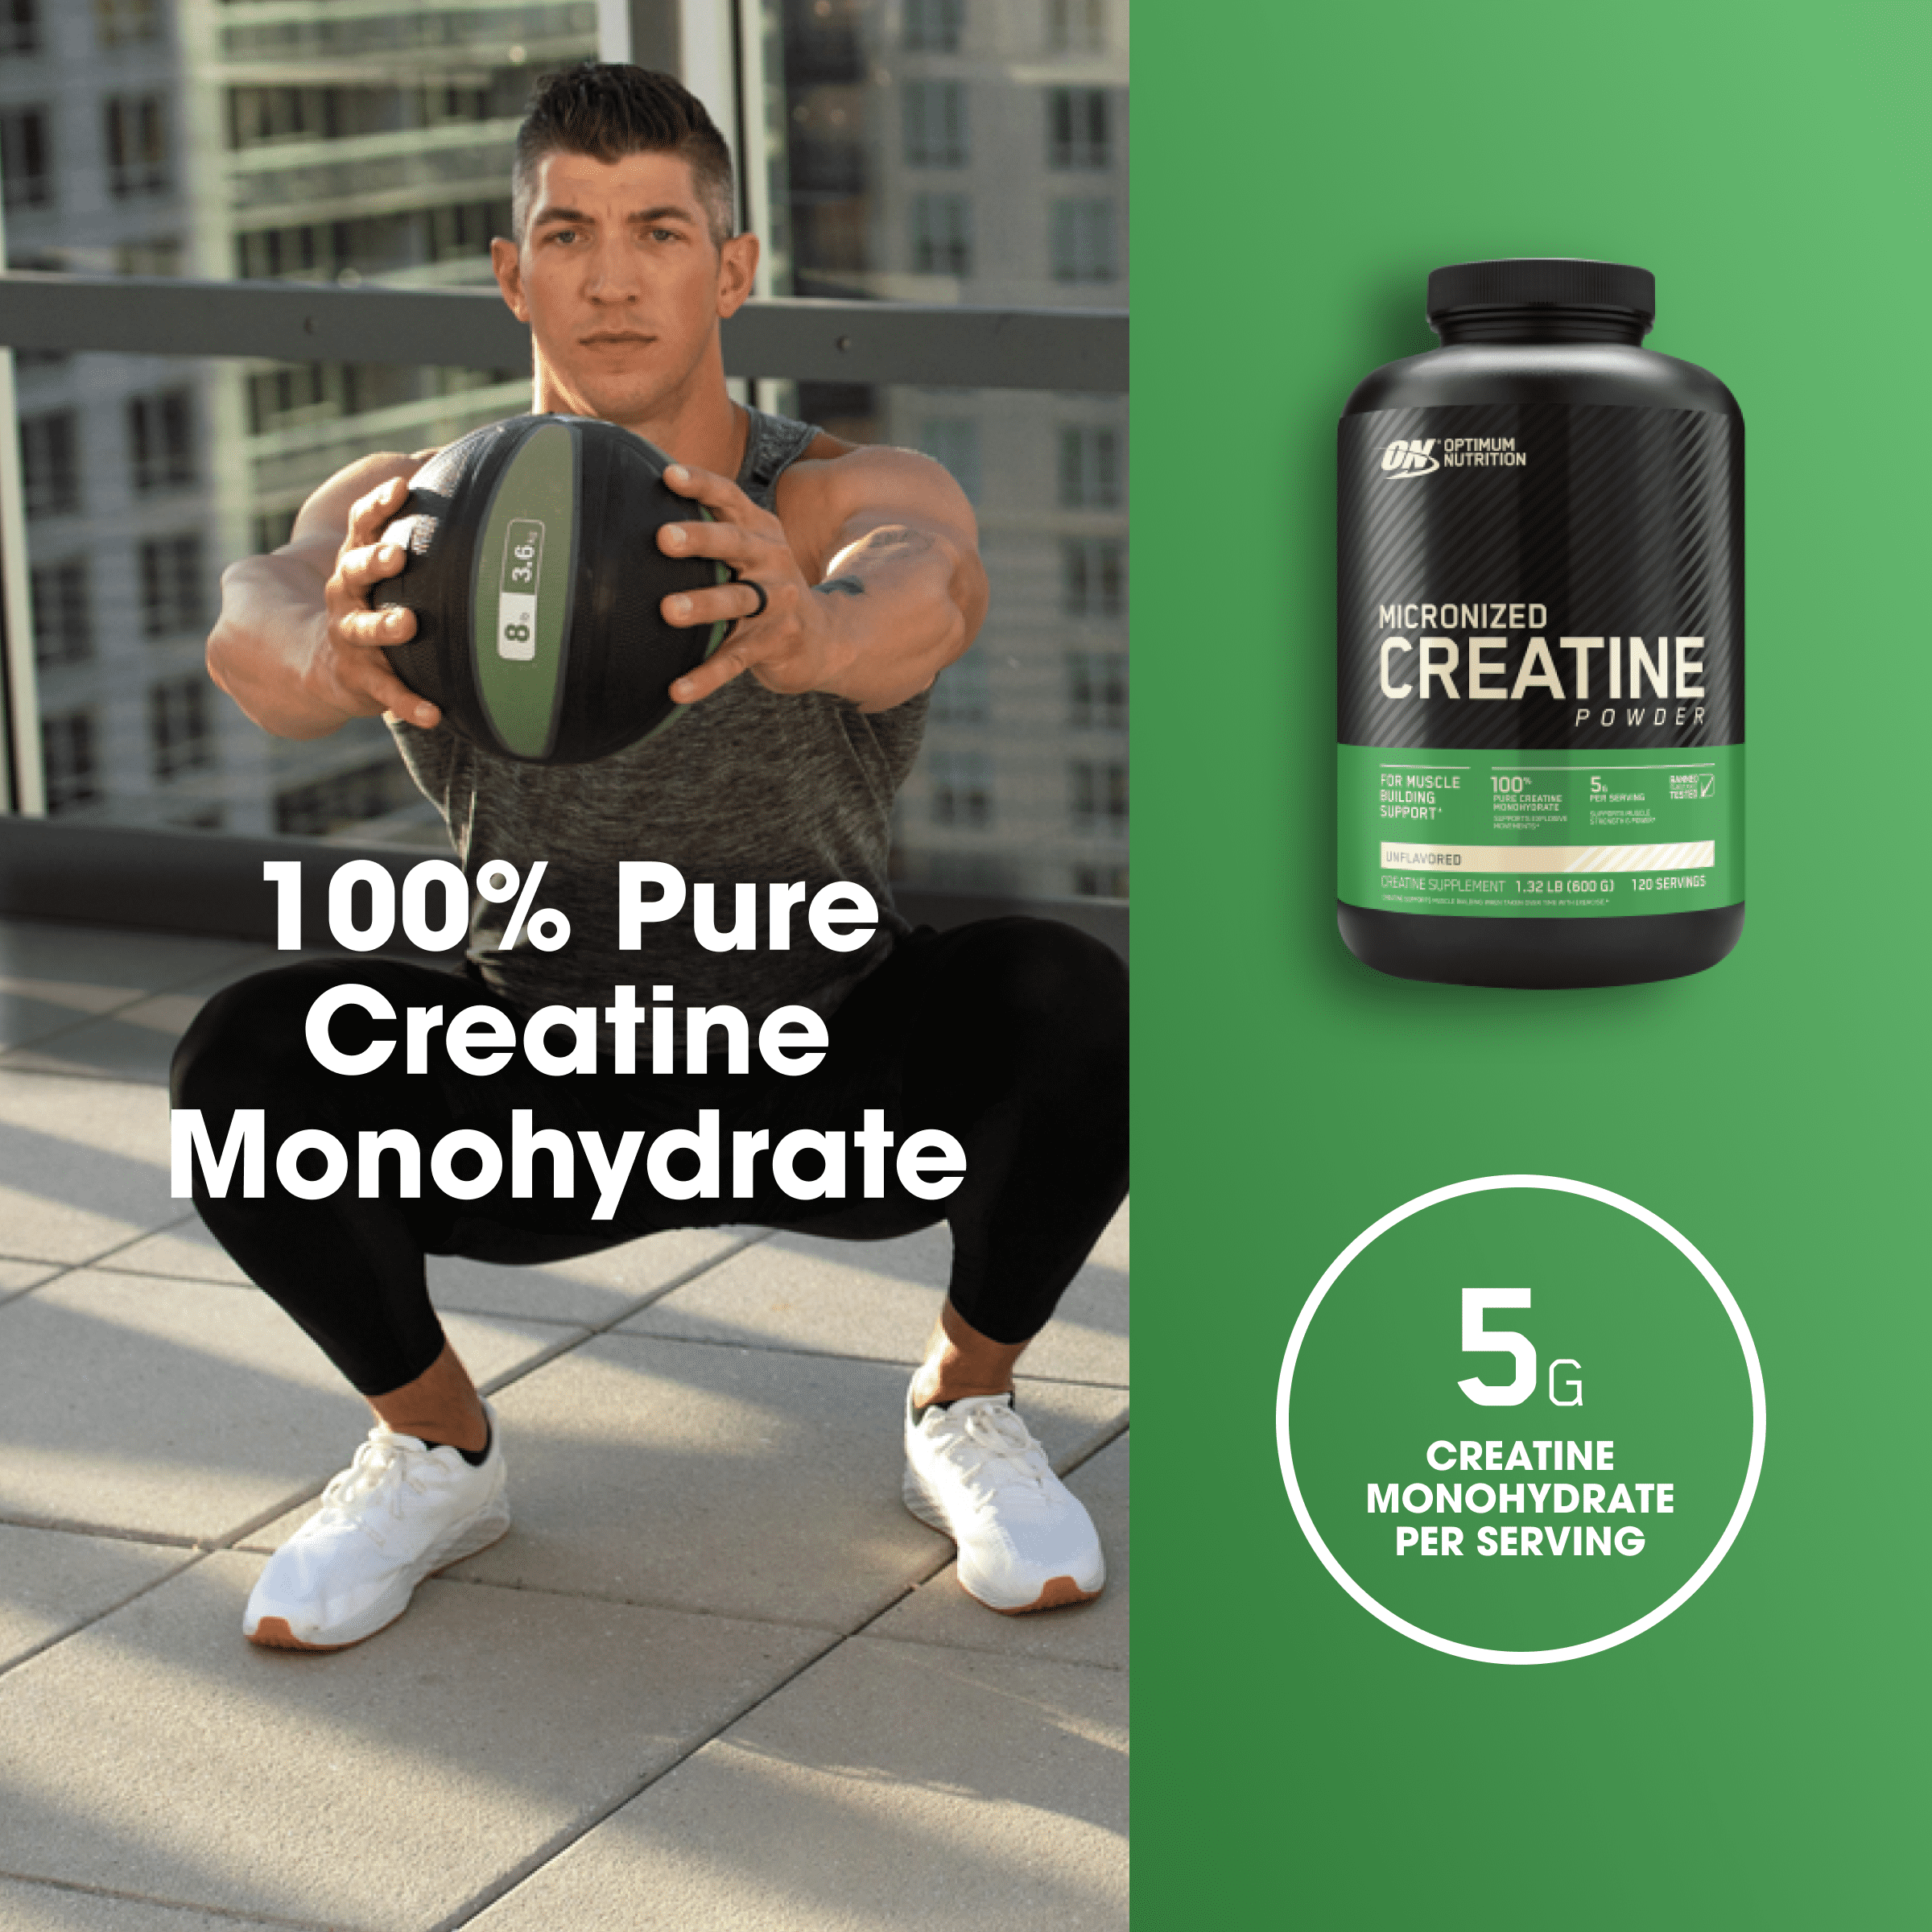 Creatine Monohydrate Powder 600 Grams (1.32lb), Unflavored